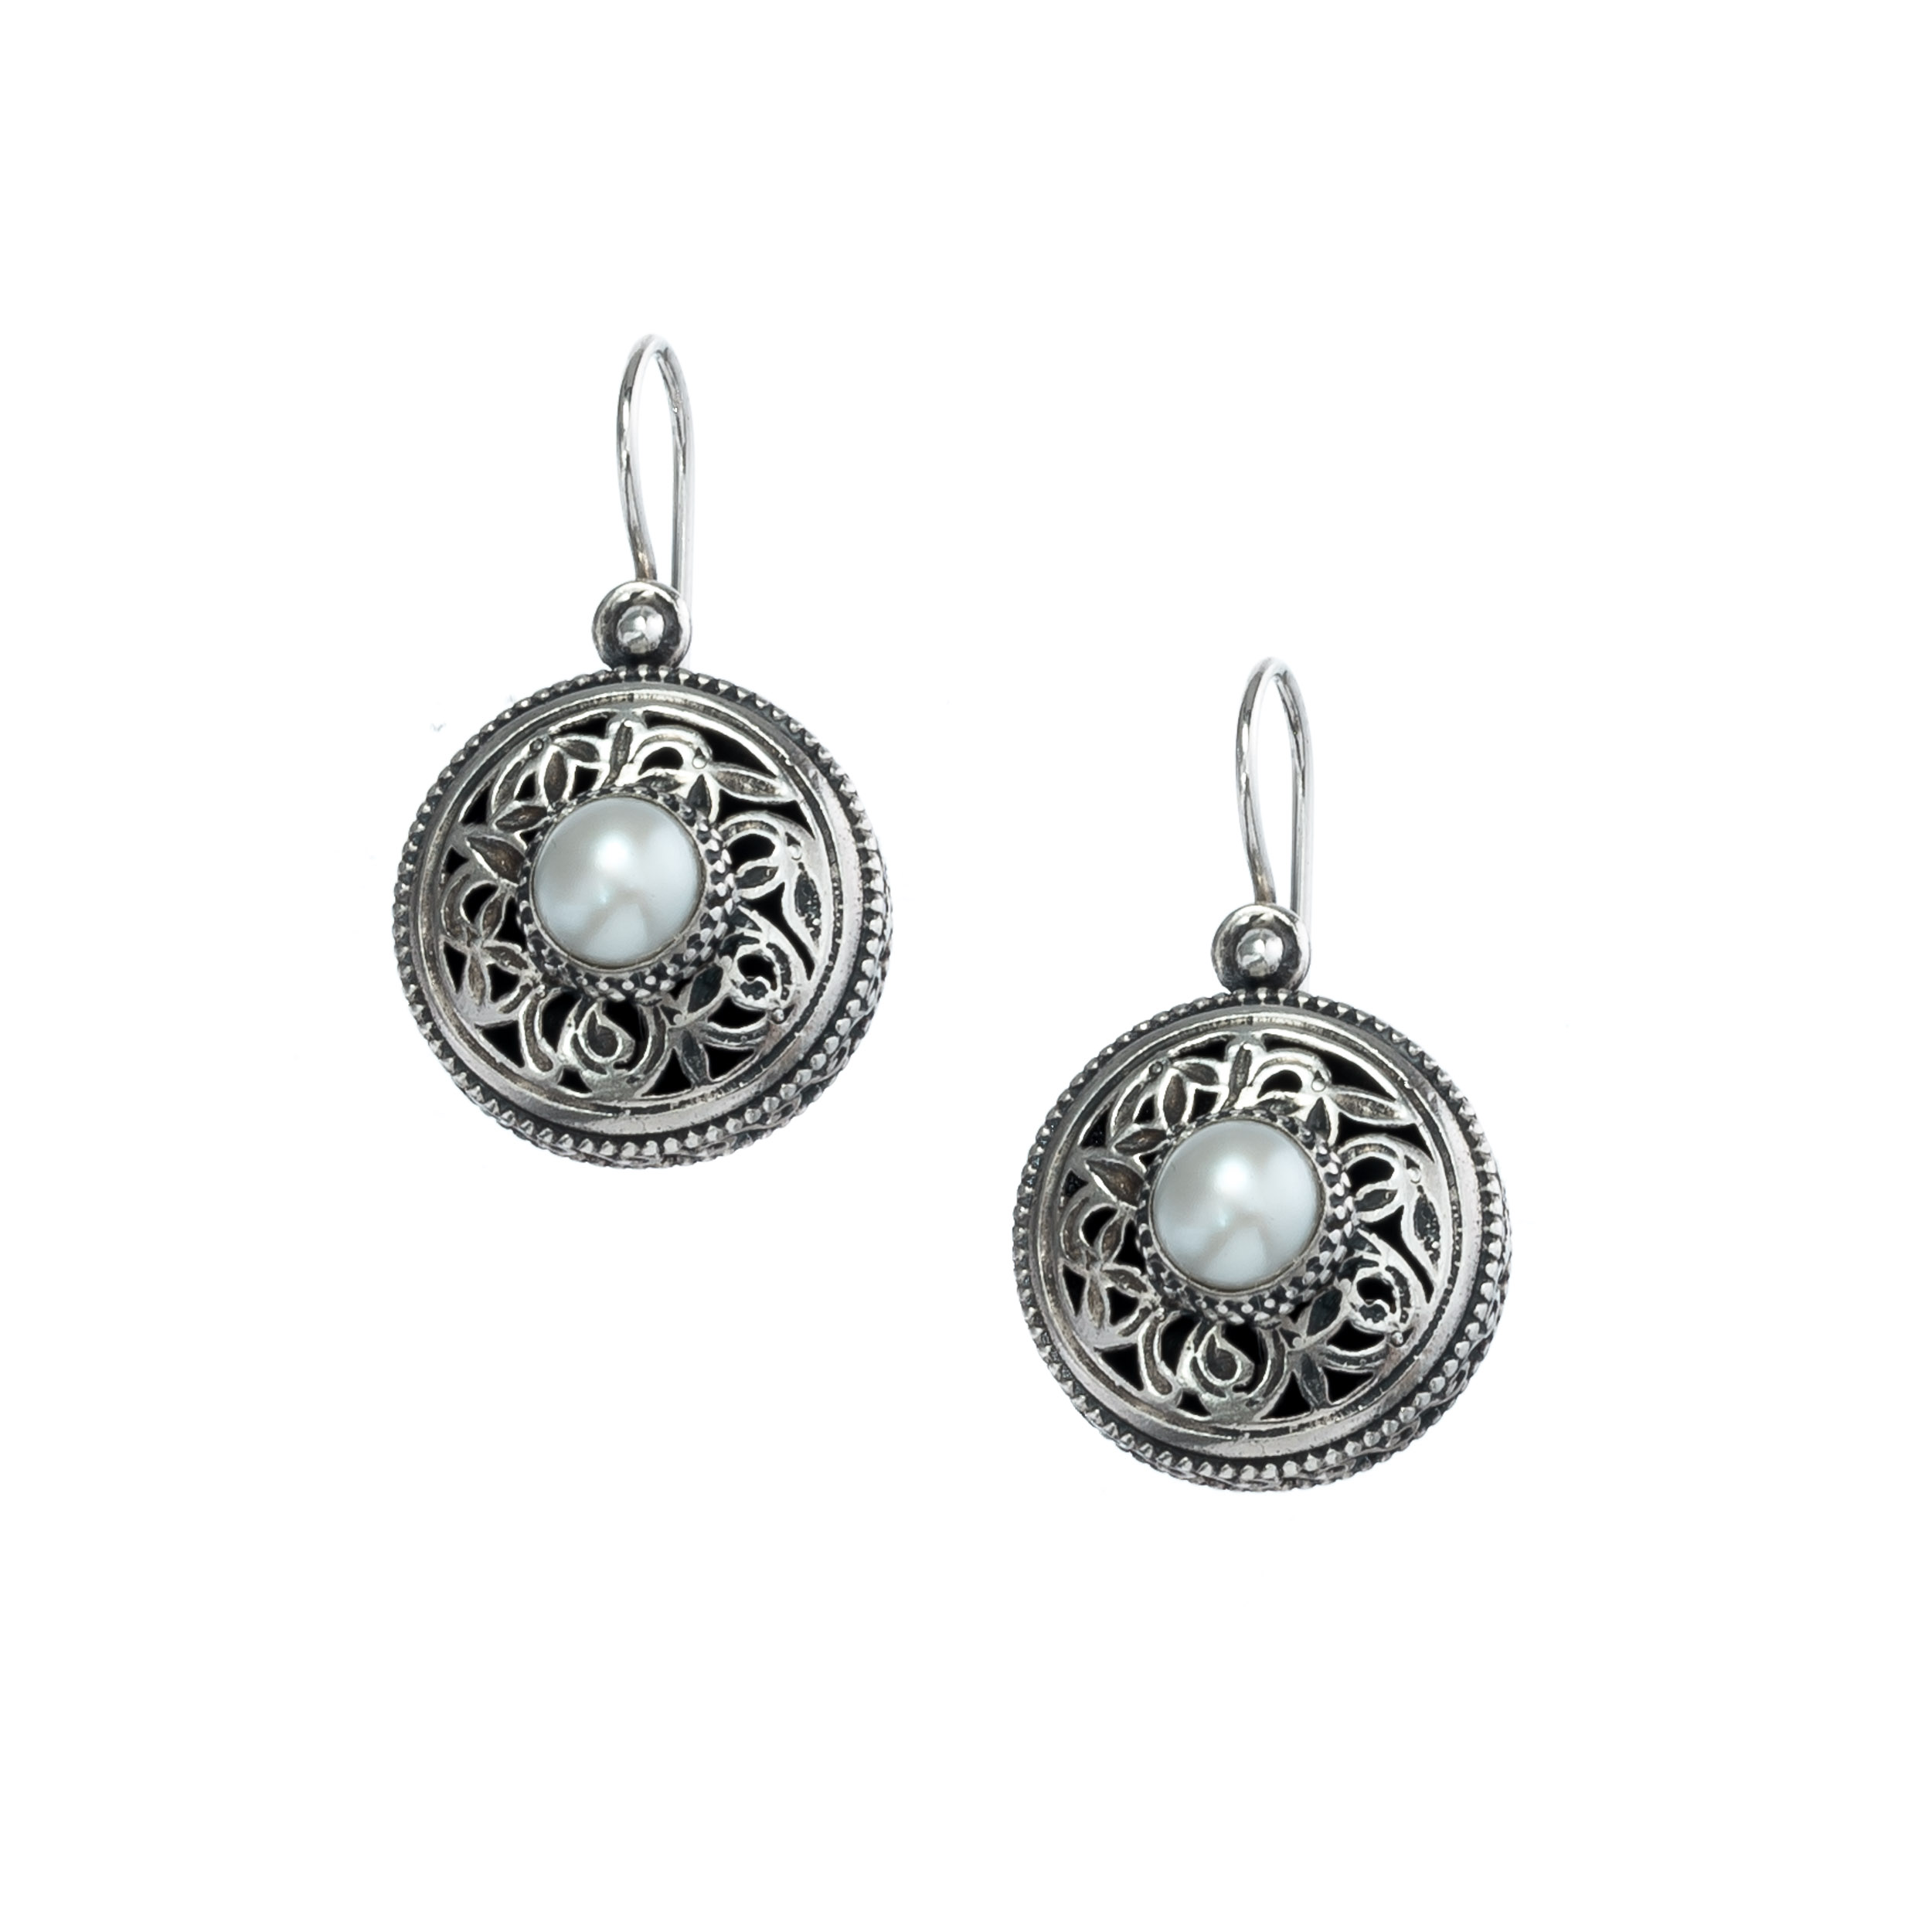 Garden Shadows Round earrings in Sterling Silver with pearls